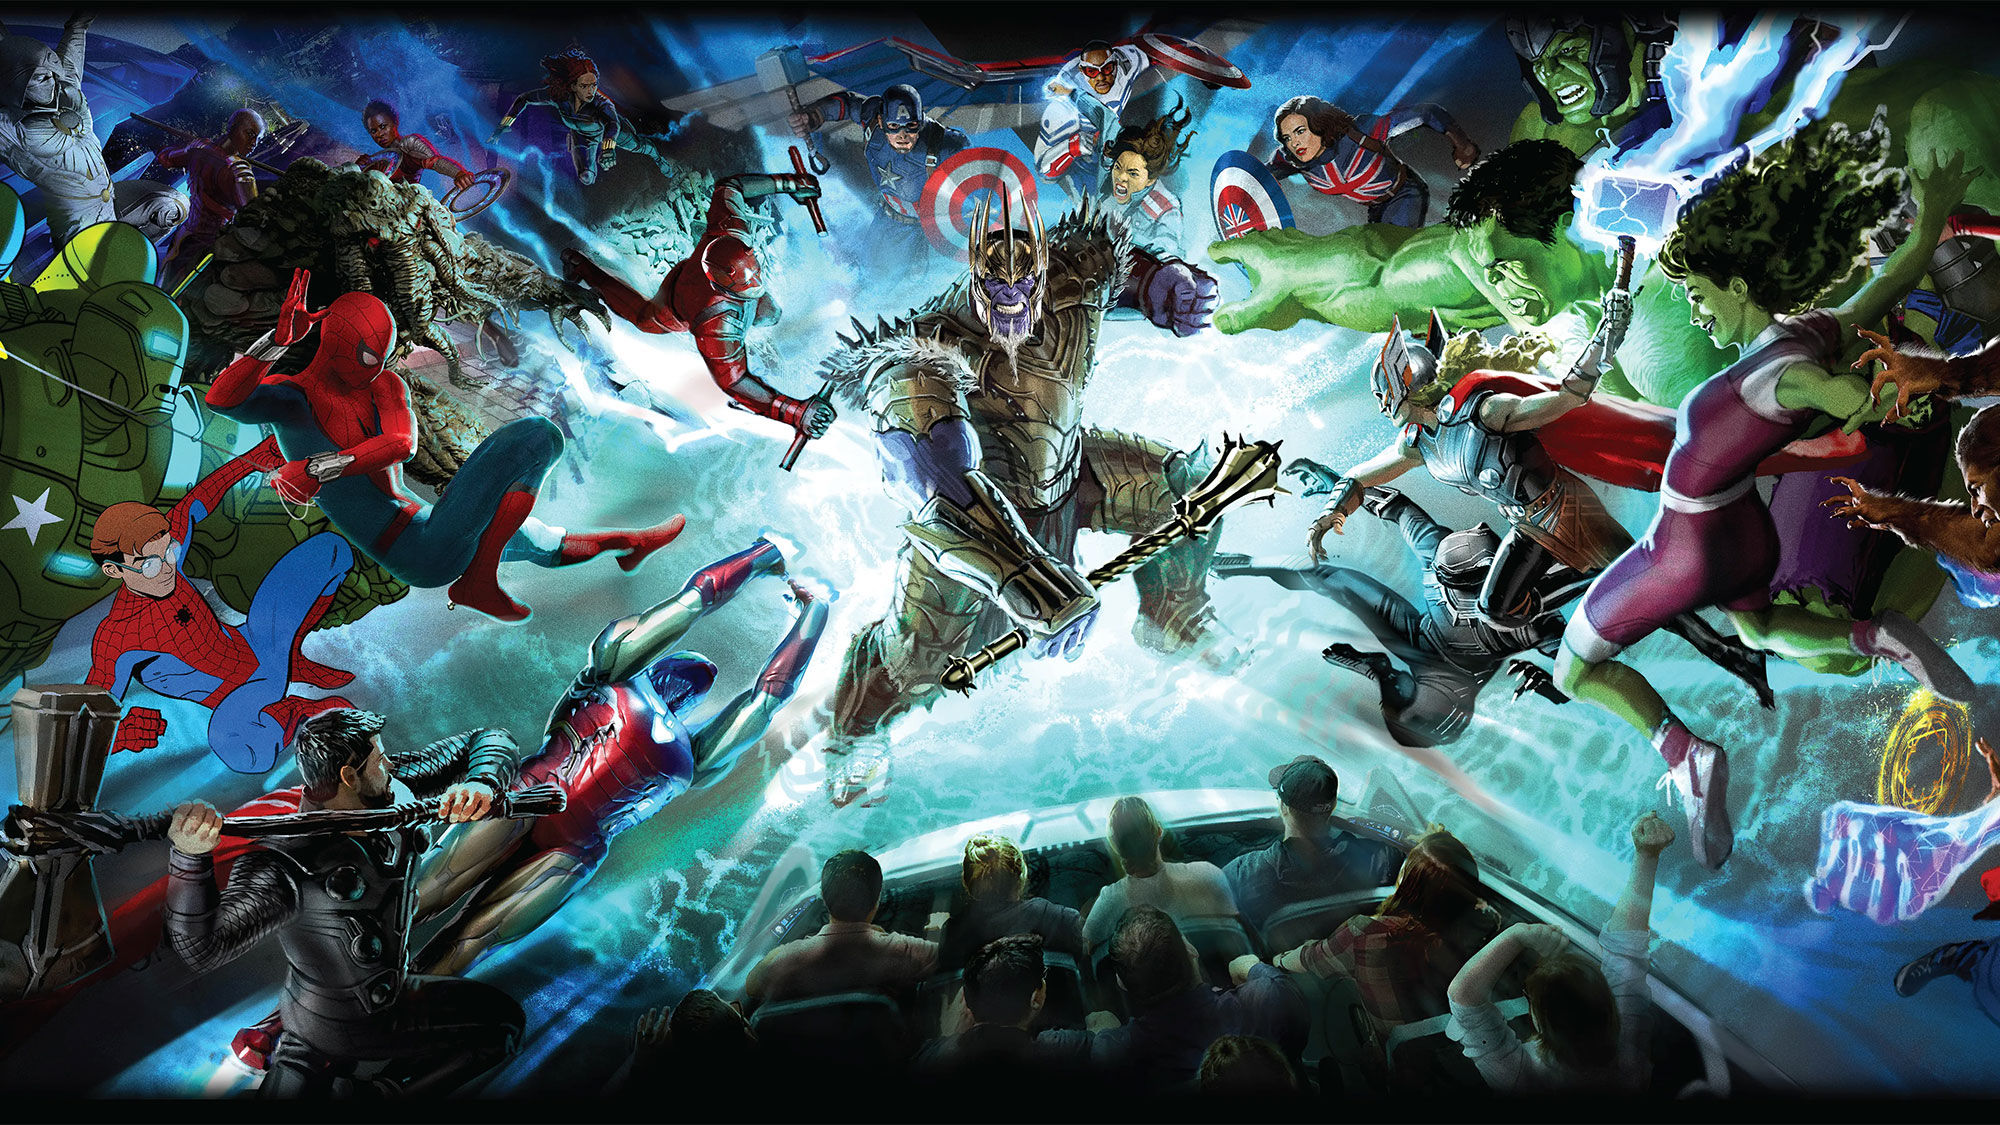 A new family attraction will see guests join the Avengers in battle at Avengers Campus in Disney California Adventure.